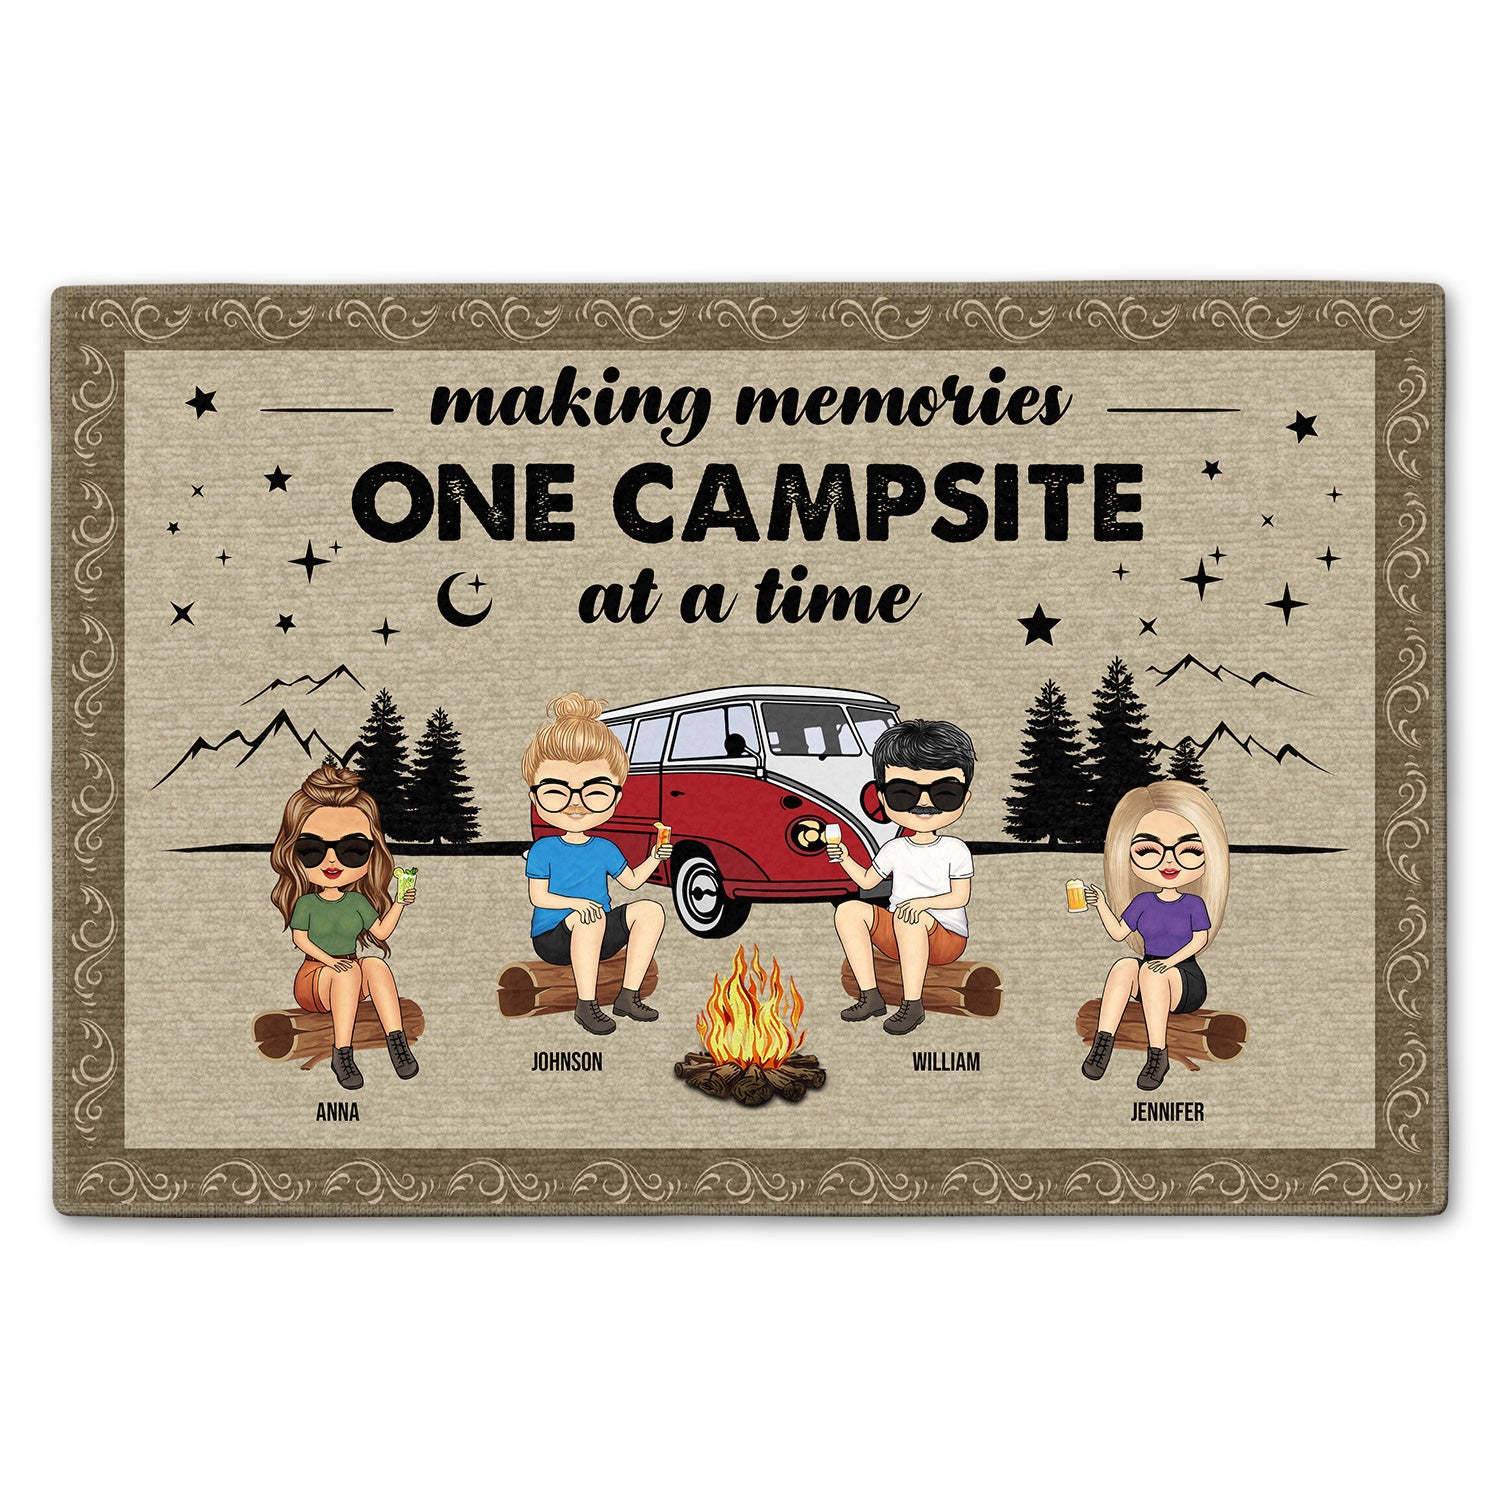 Best Friends Making Memories One Campsite At A Time - Camping Gift For Family, BFF Besties & Siblings - Personalized Custom Doormat